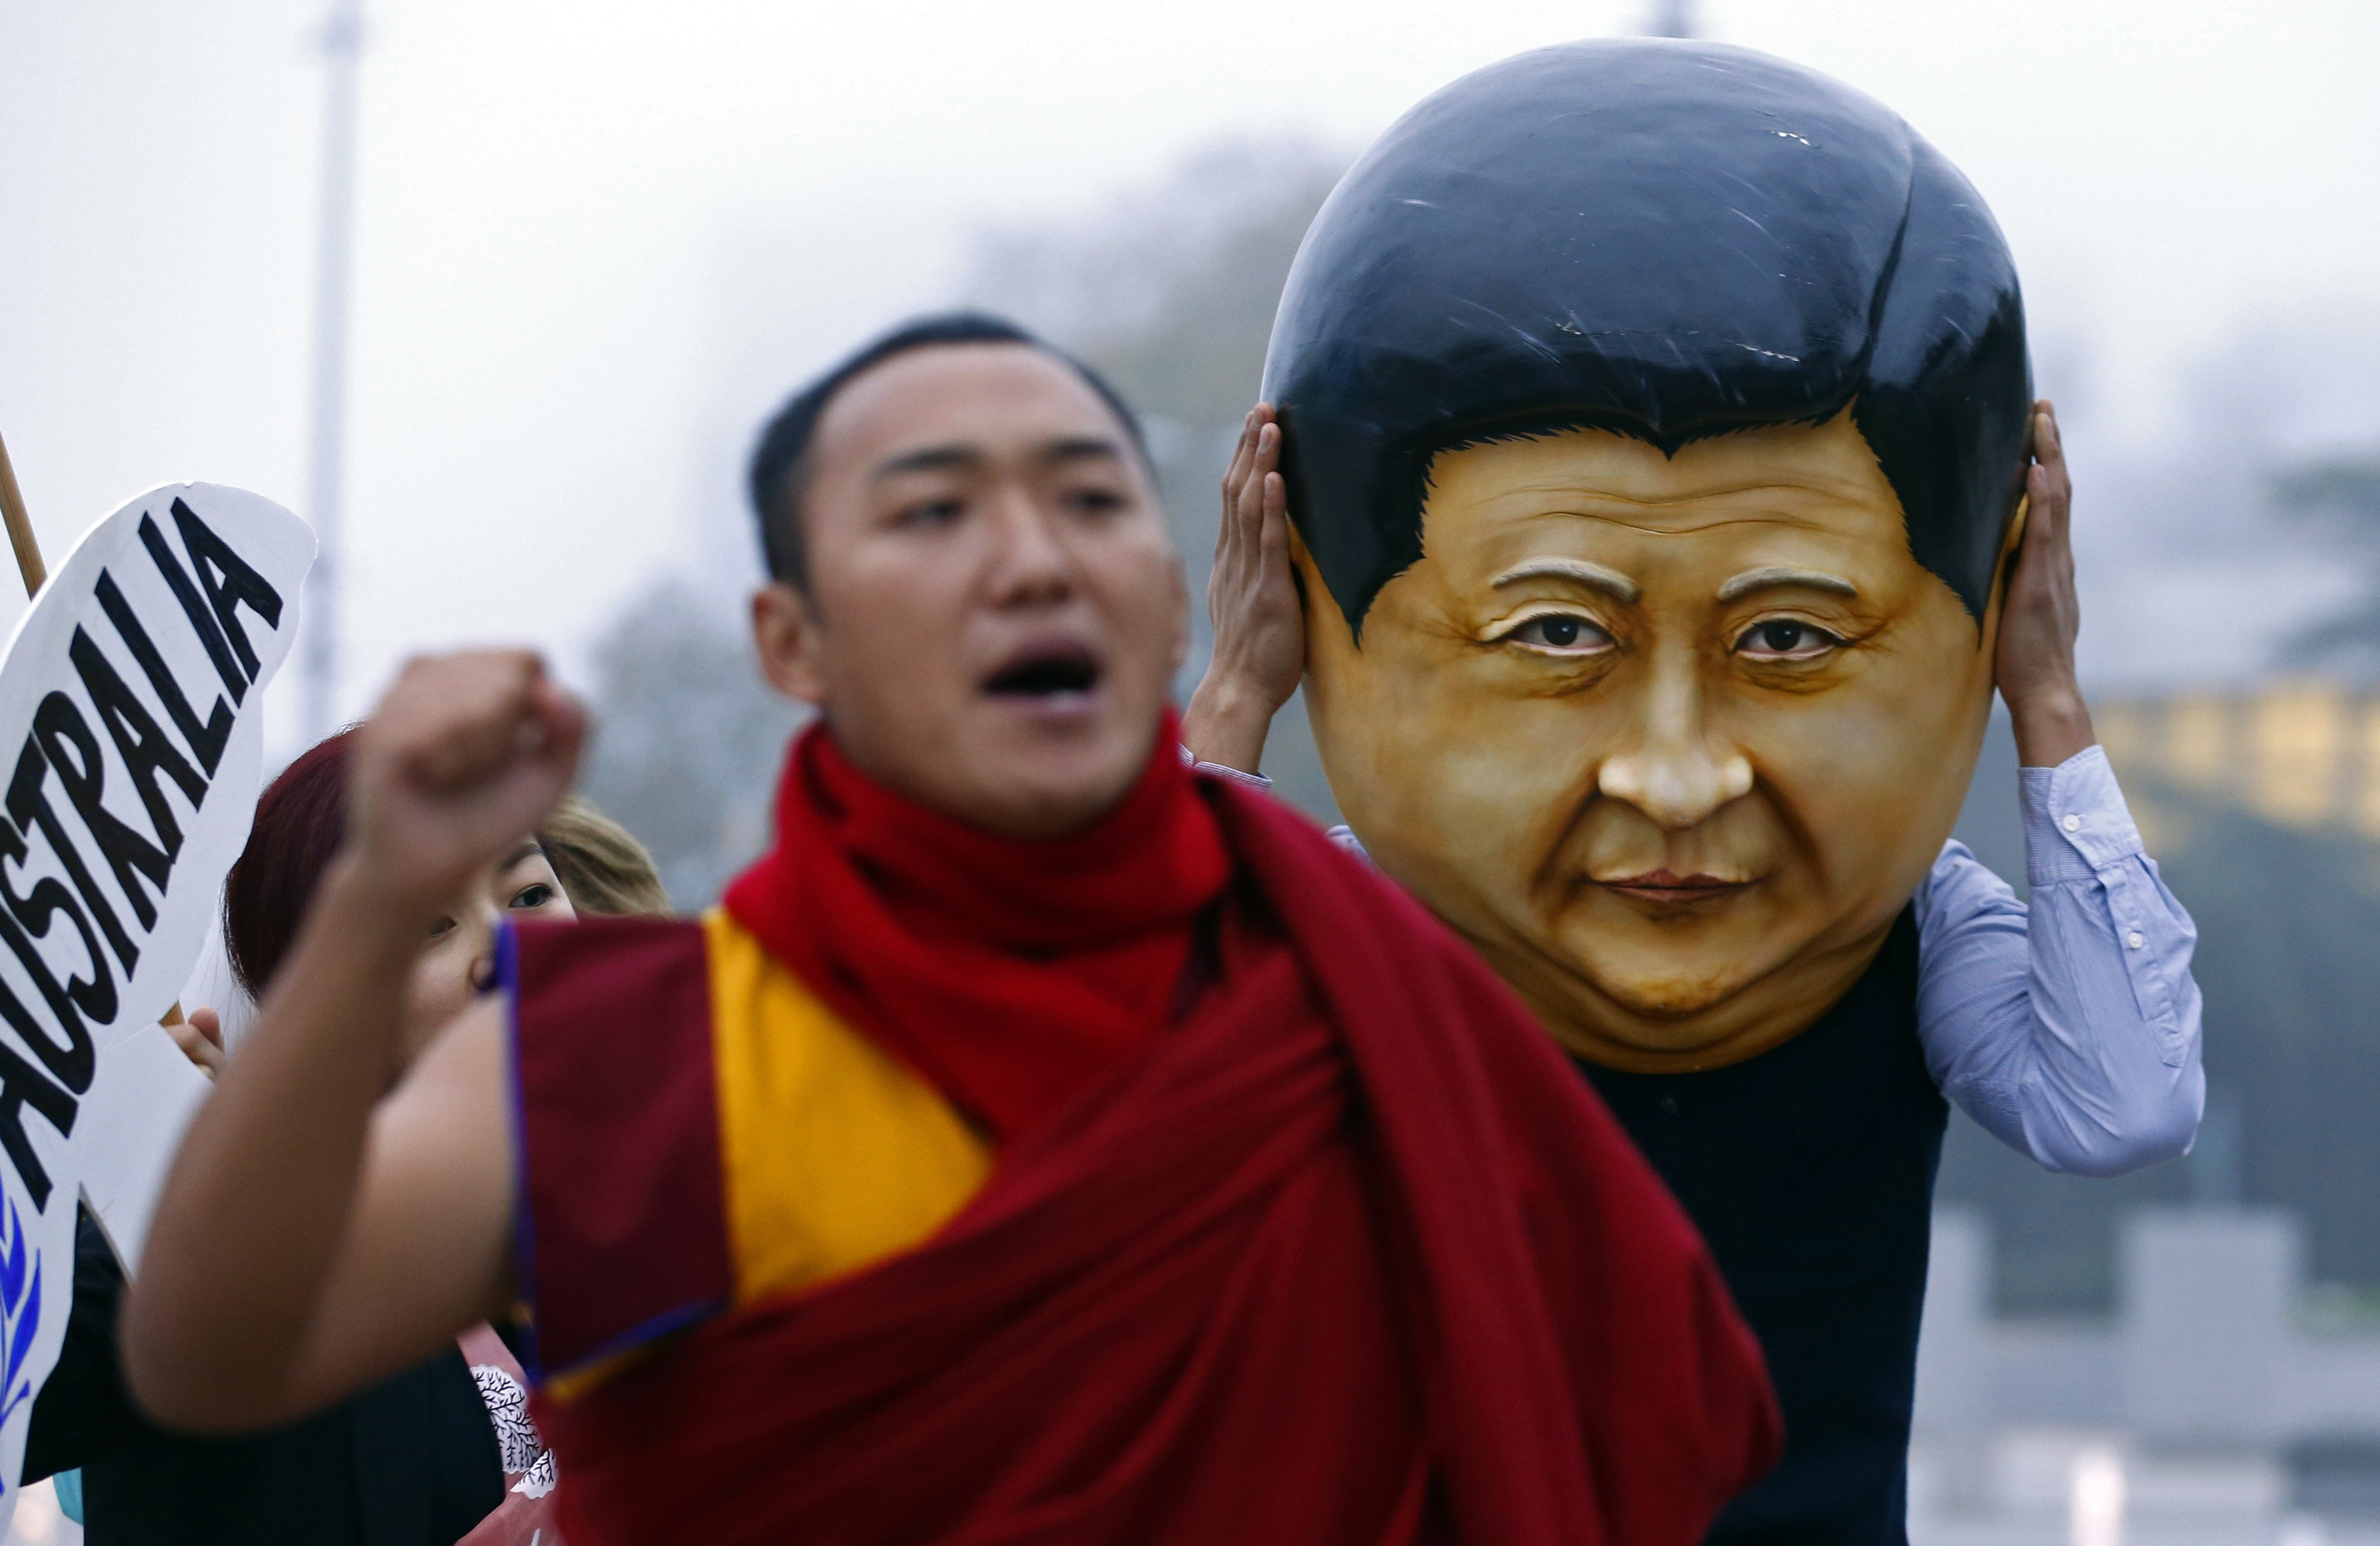 A protester wearing a giant head representing President Xi Jinping takes part in a demonstration at the UN in Geneva in October. Photo: Reuters